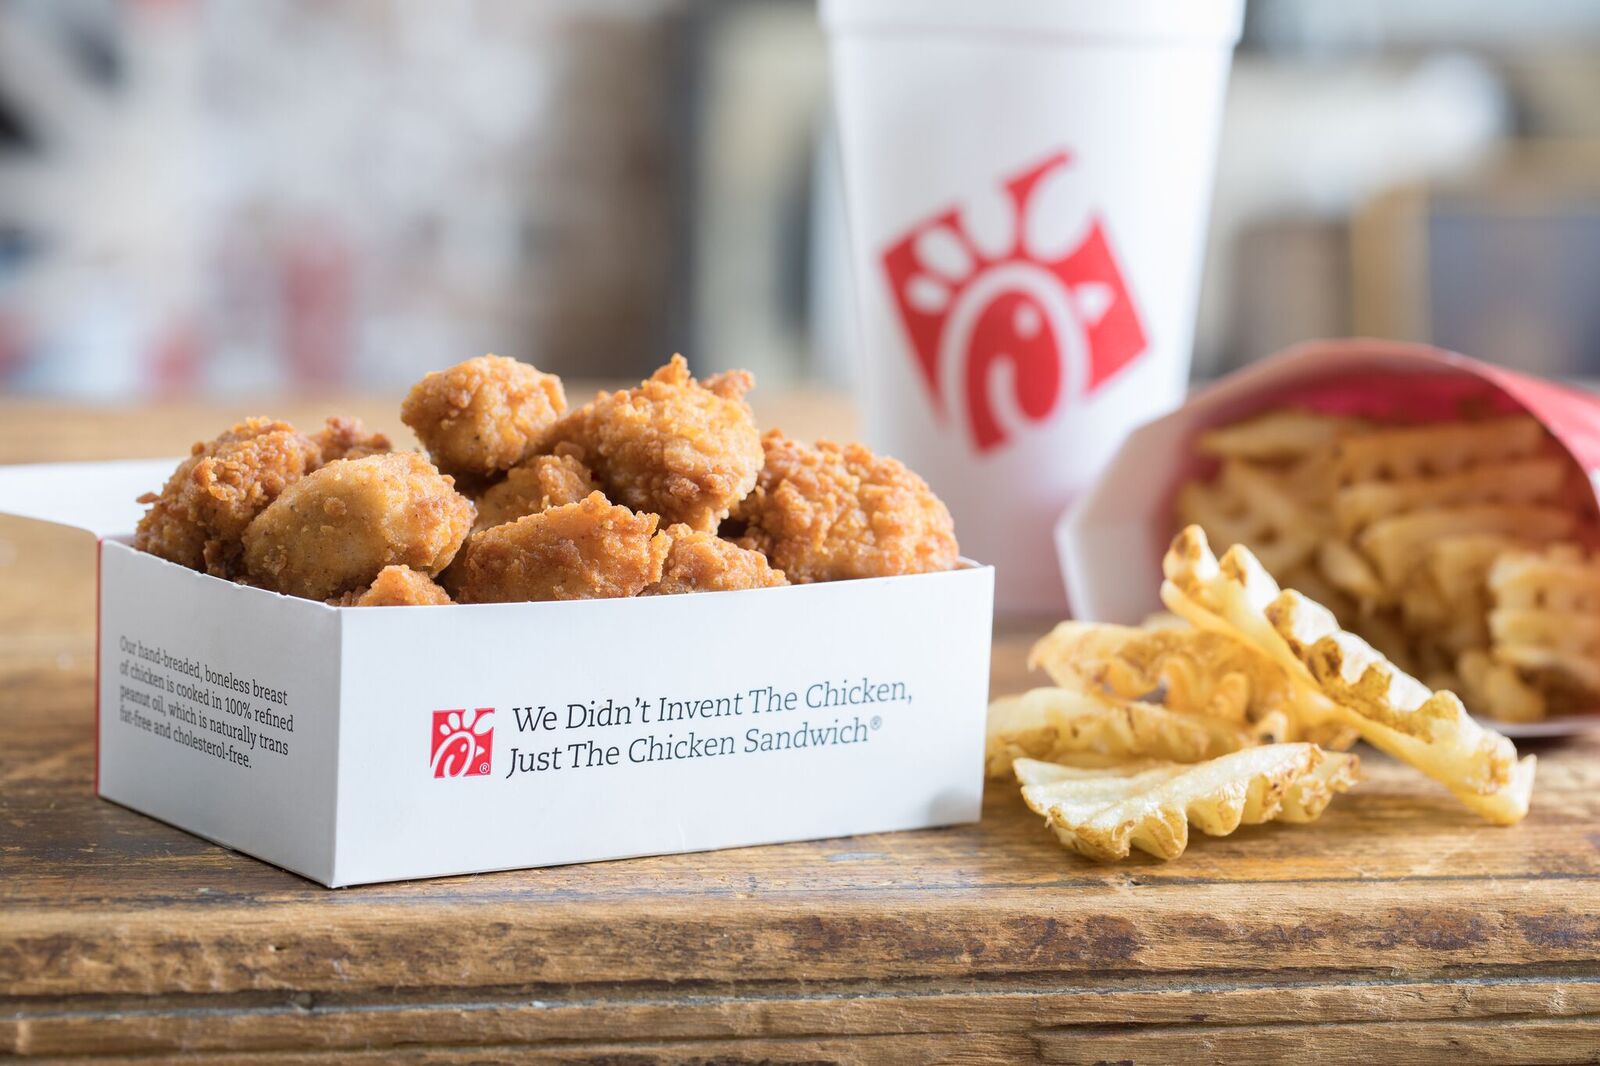 Can We Guess Your Age and Gender Based on Your Chick-fil-A Order? Chick-fil-A nuggets